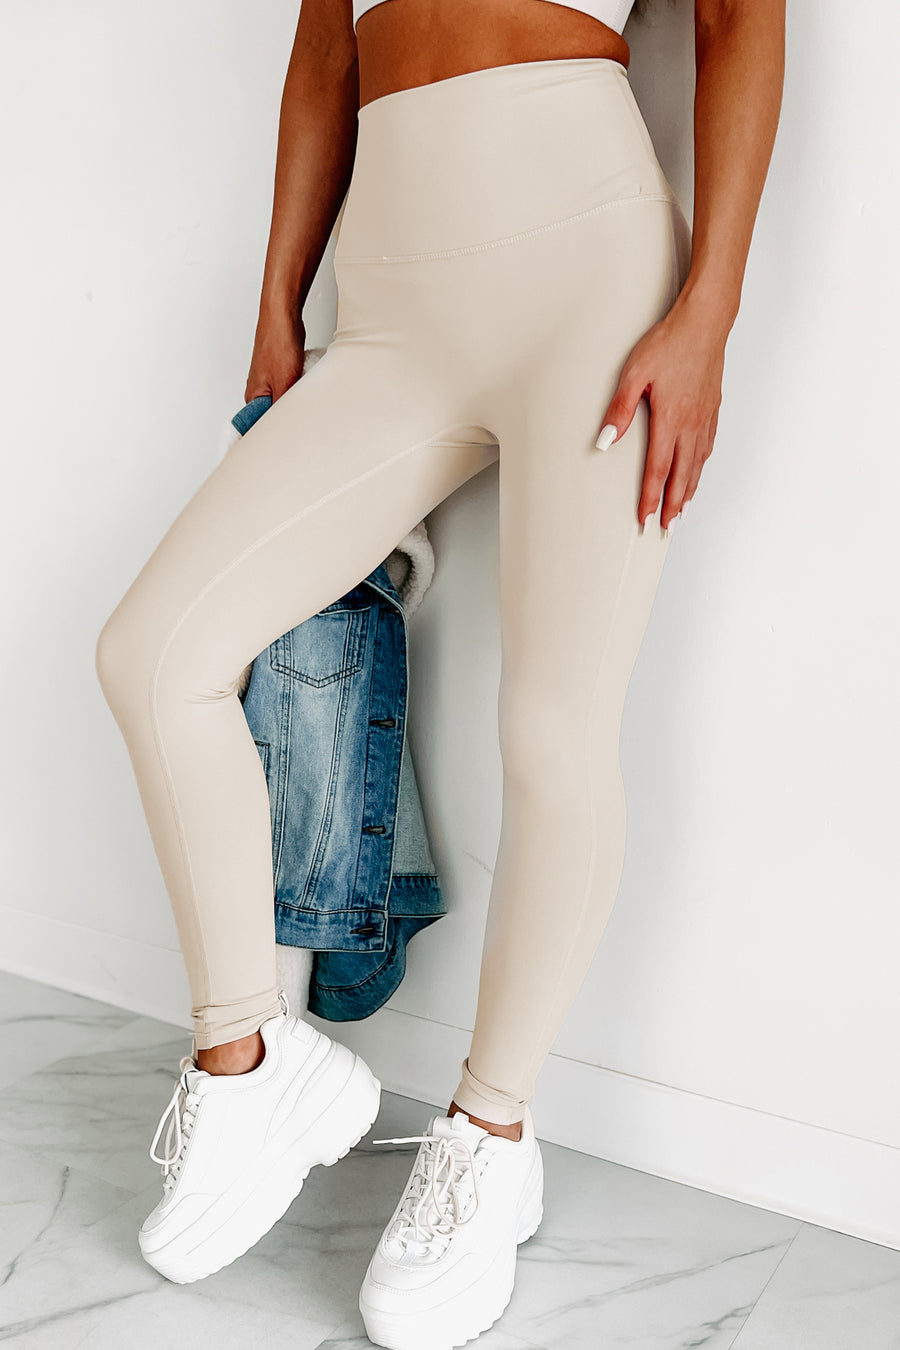 Out Here Lifting Weights Two Piece Legging Set (Beige) - NanaMacs